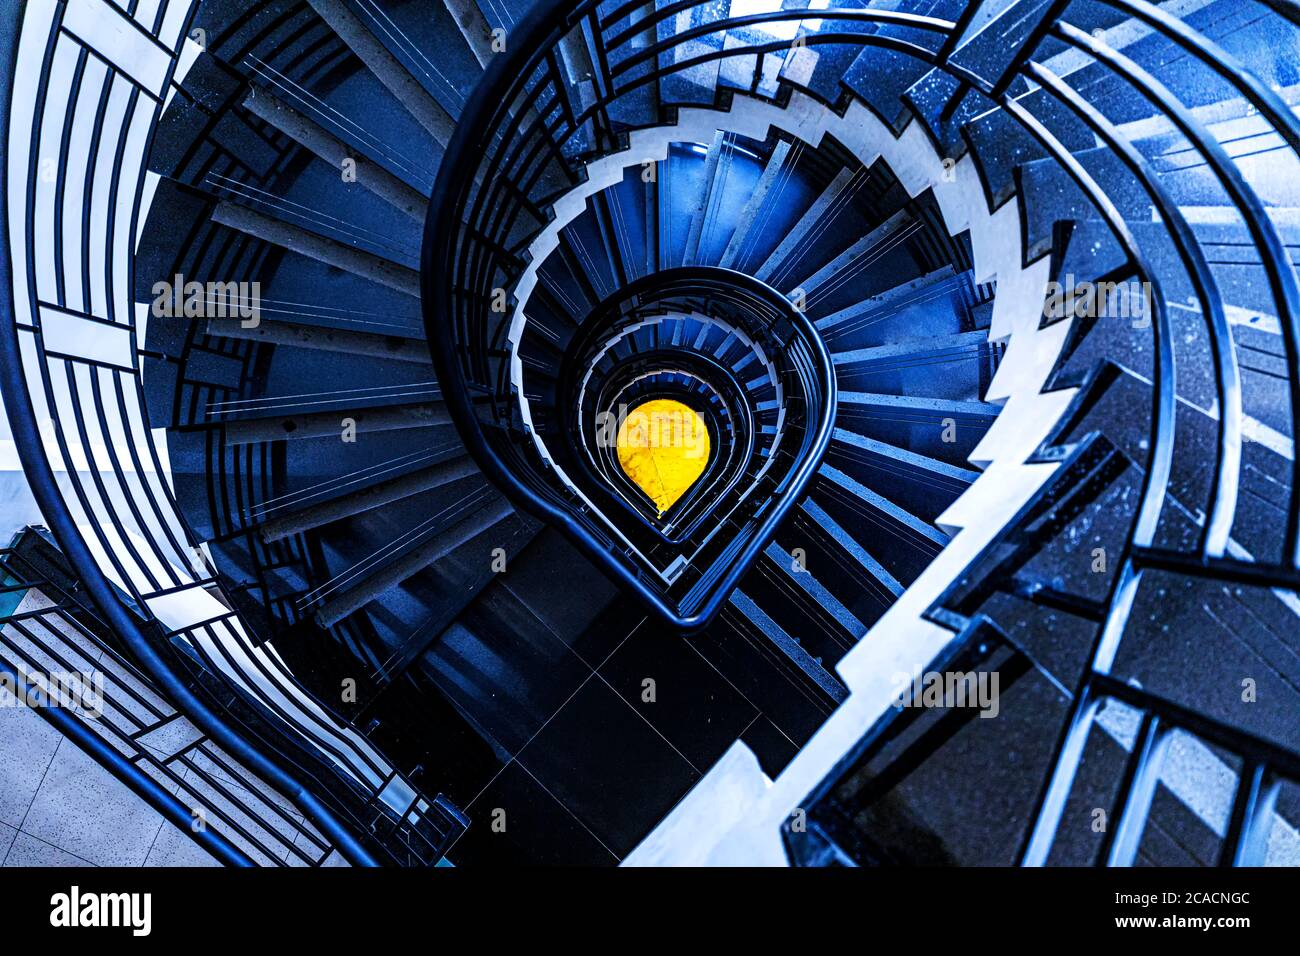 Water Drop Heart This is a perfect spiral staircase, I am rotating down, and seaching for the water drop heart. Stock Photo